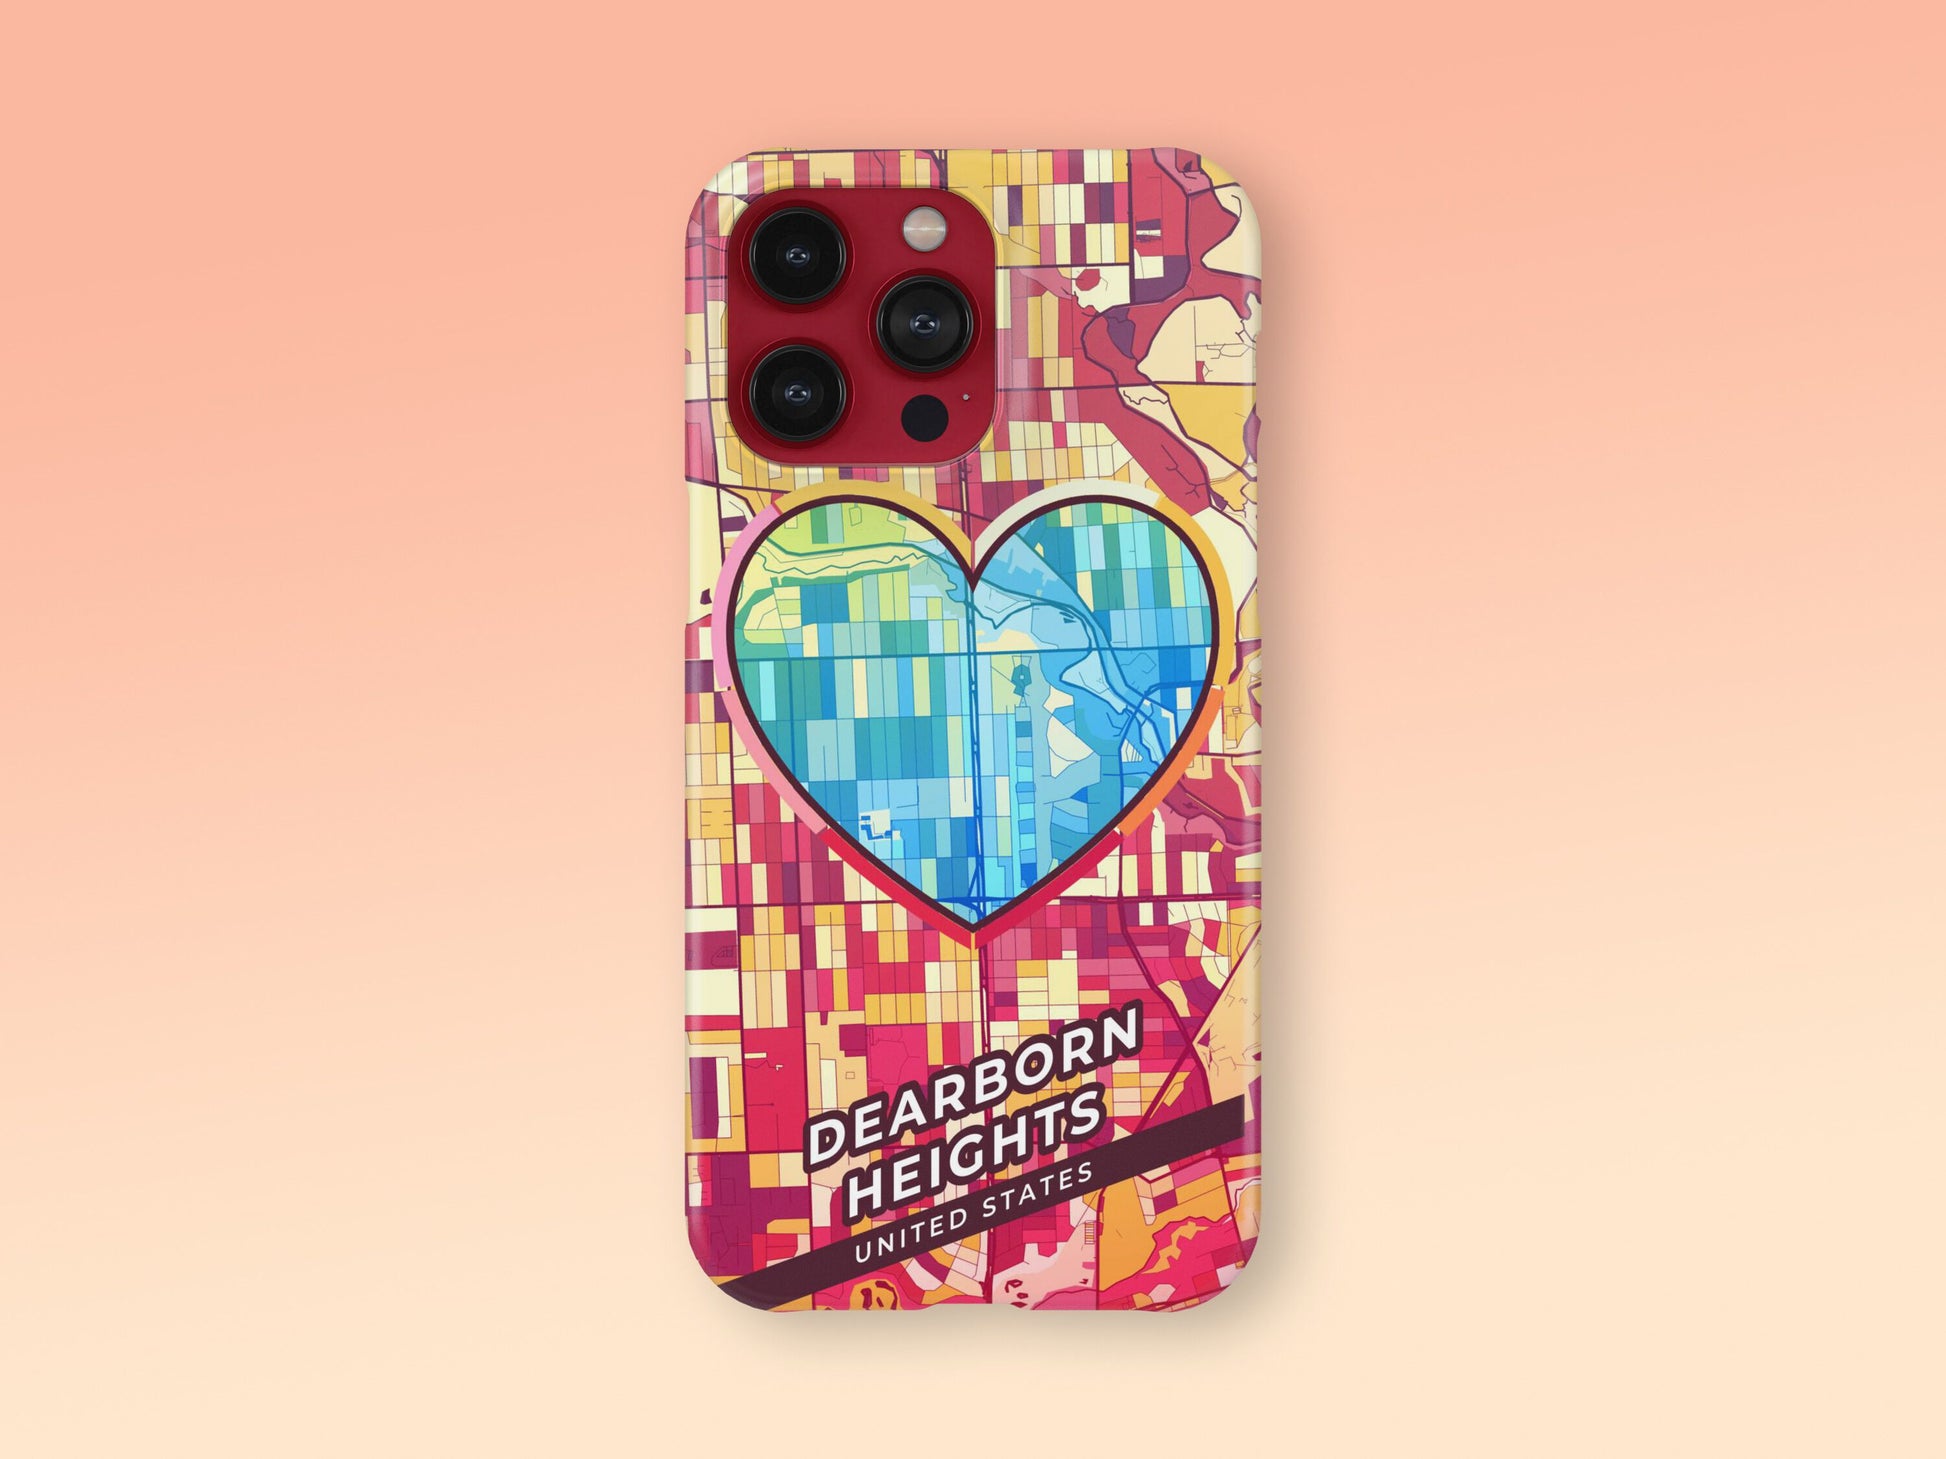 Dearborn Heights Michigan slim phone case with colorful icon. Birthday, wedding or housewarming gift. Couple match cases. 2